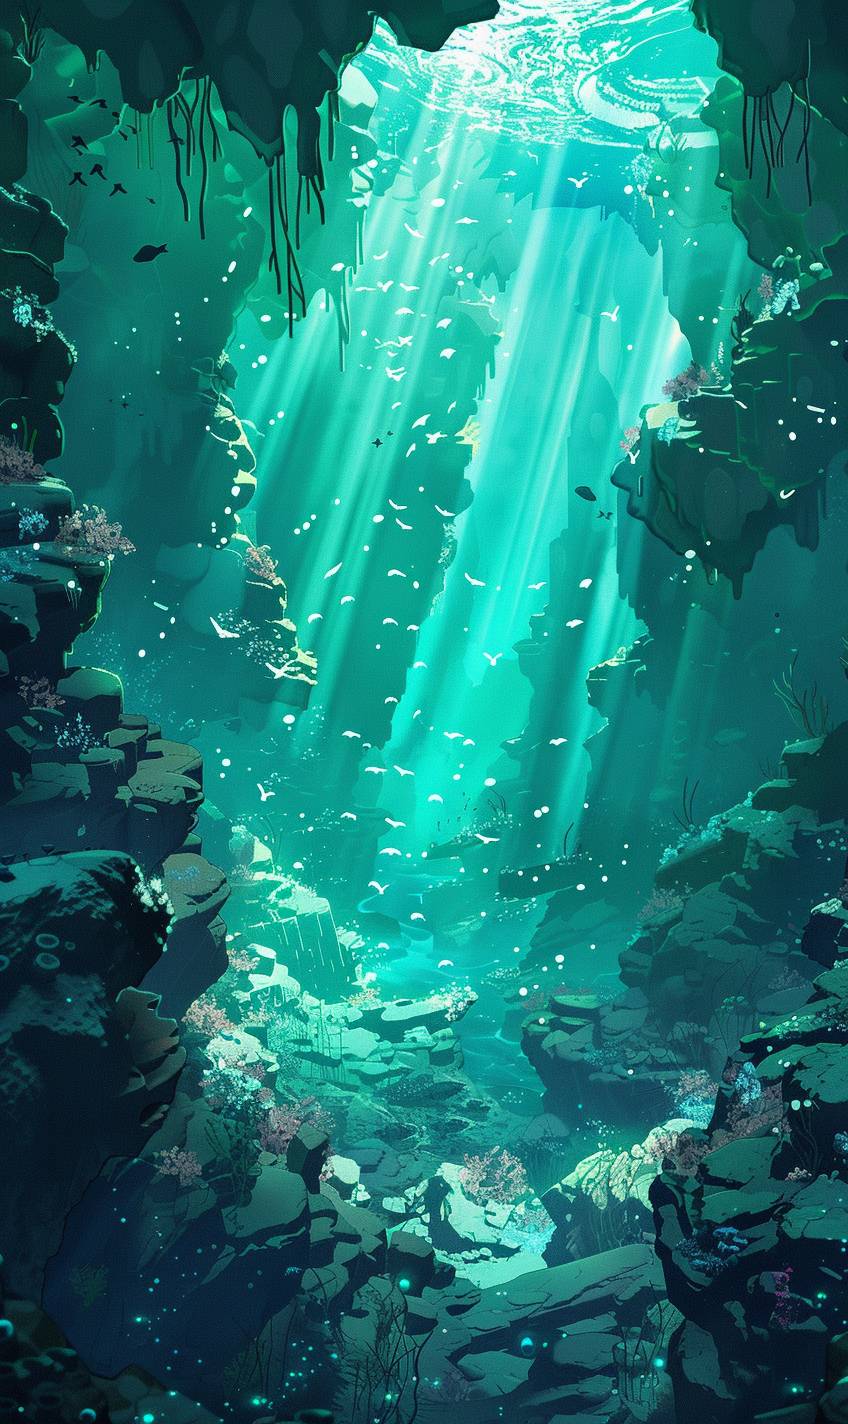 In the style of Atey Ghailan, an underwater cavern with magical merfolk